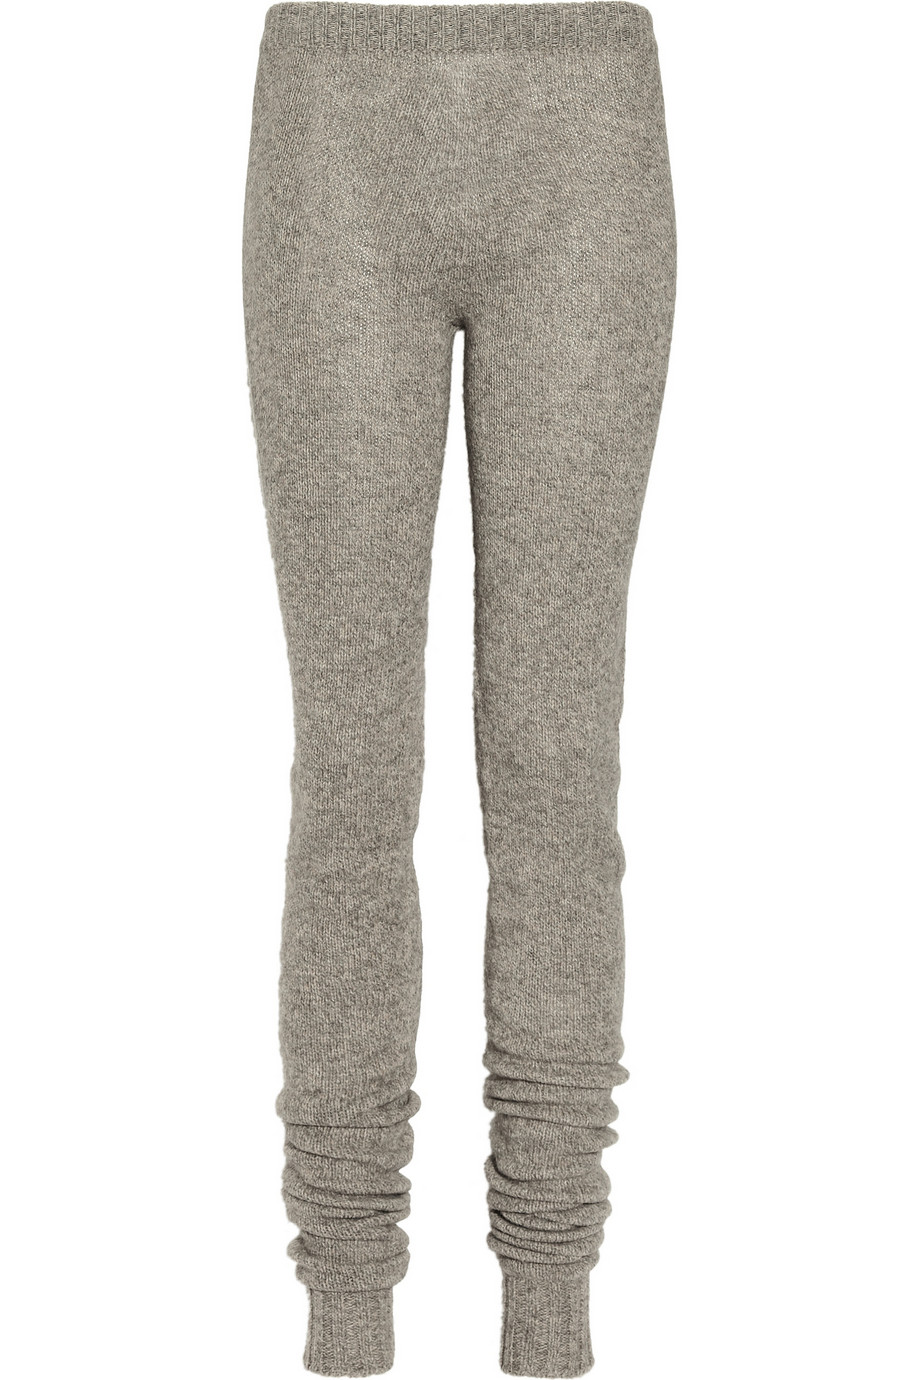 Rick owens Merino Wool and Yakblend Leggings in Gray (taupe) | Lyst